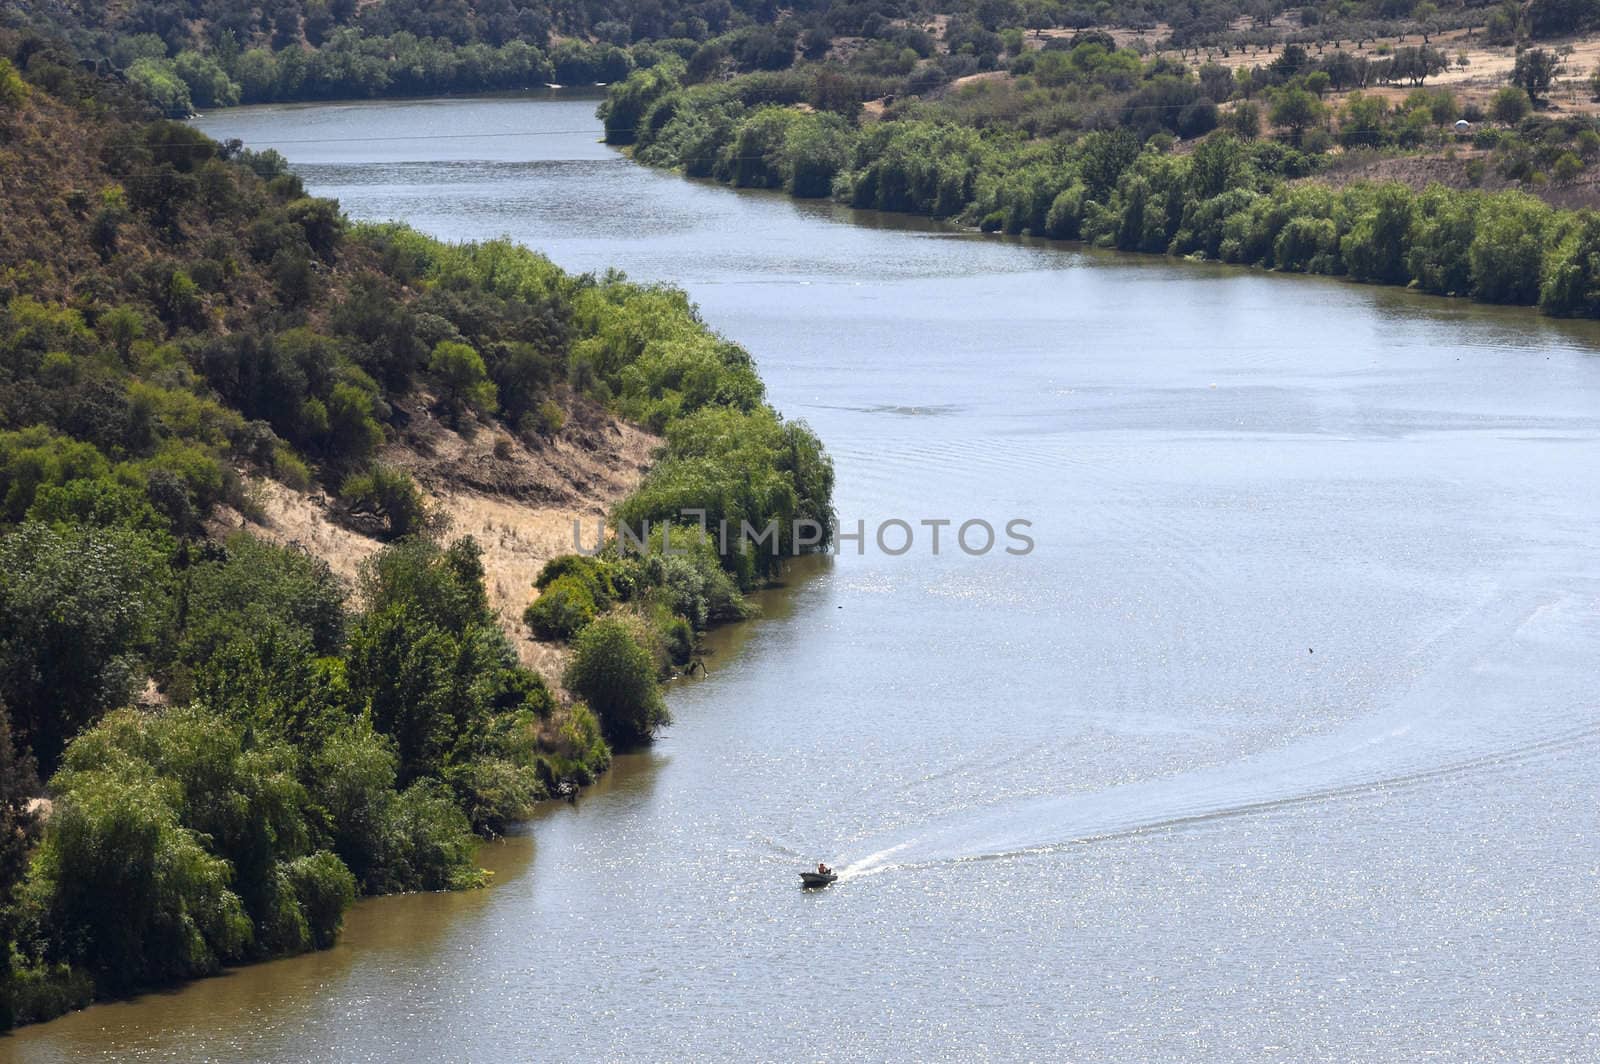 Guadiana river by mrfotos